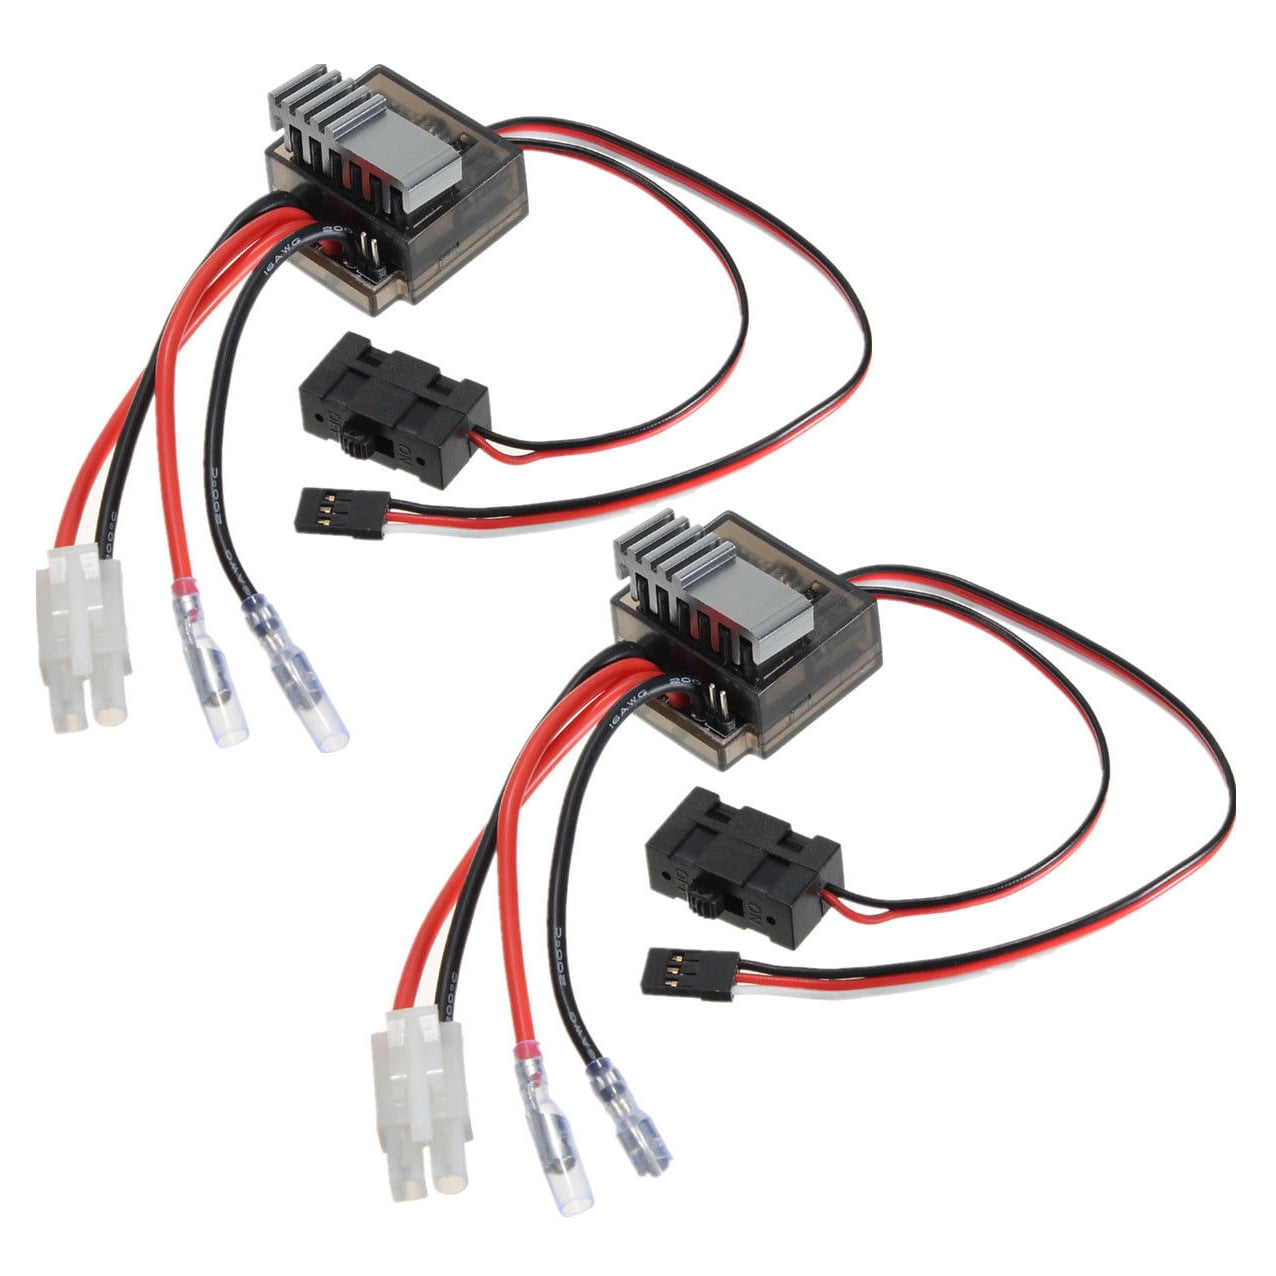 Utility 320A Speed Controller ESC For RC Car boart 1/8 1/10 Truck Buggy 